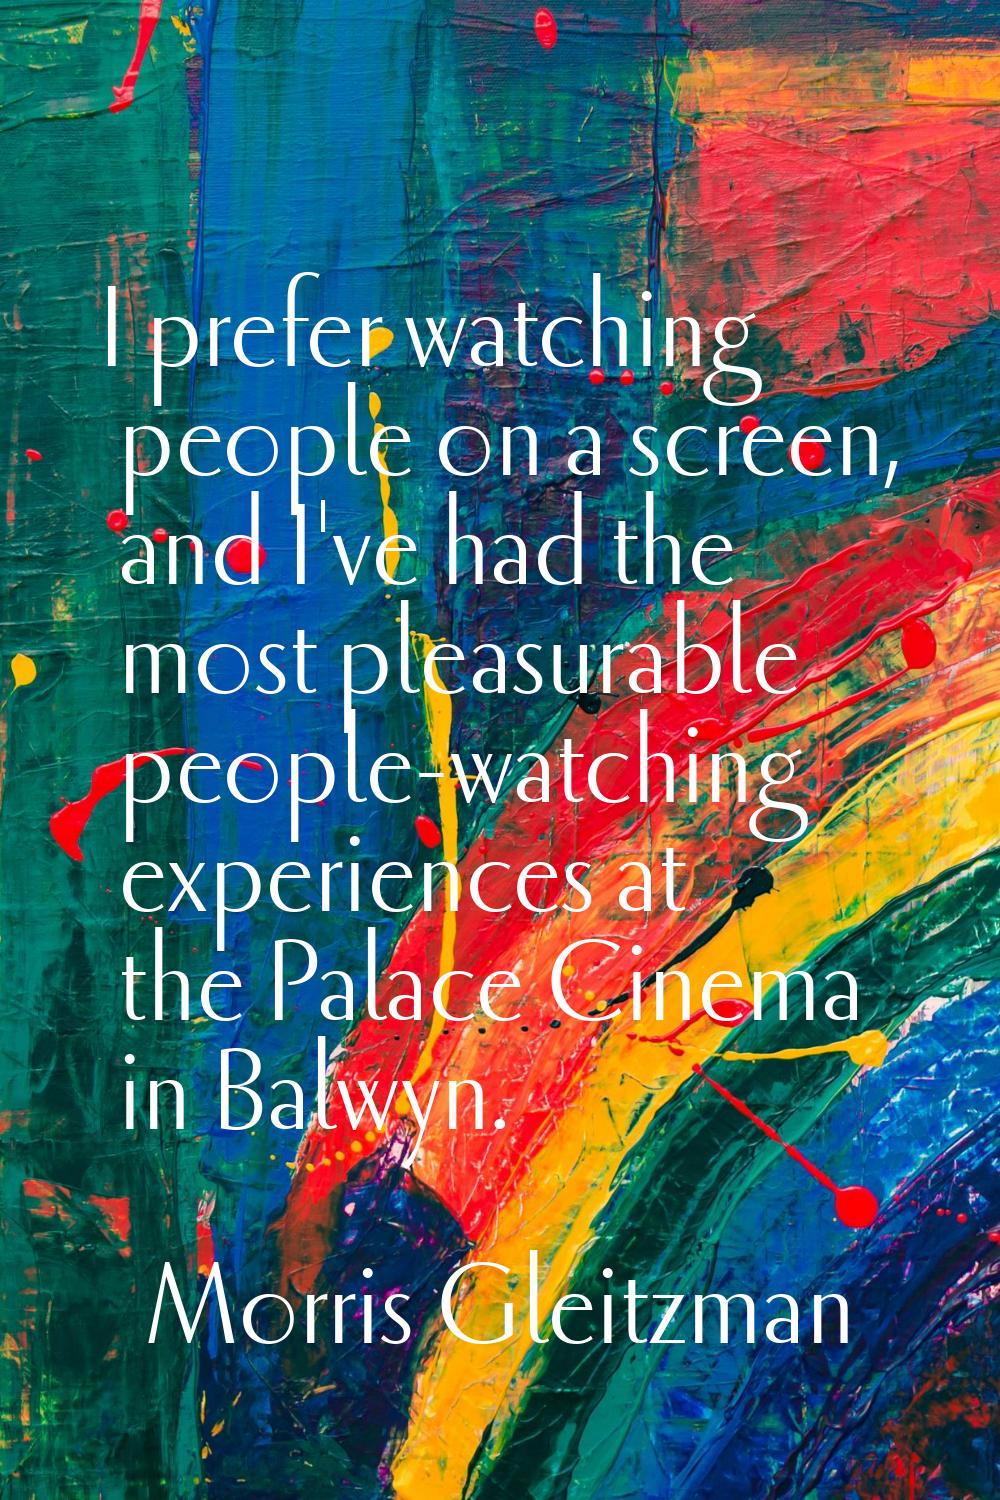 I prefer watching people on a screen, and I've had the most pleasurable people-watching experiences